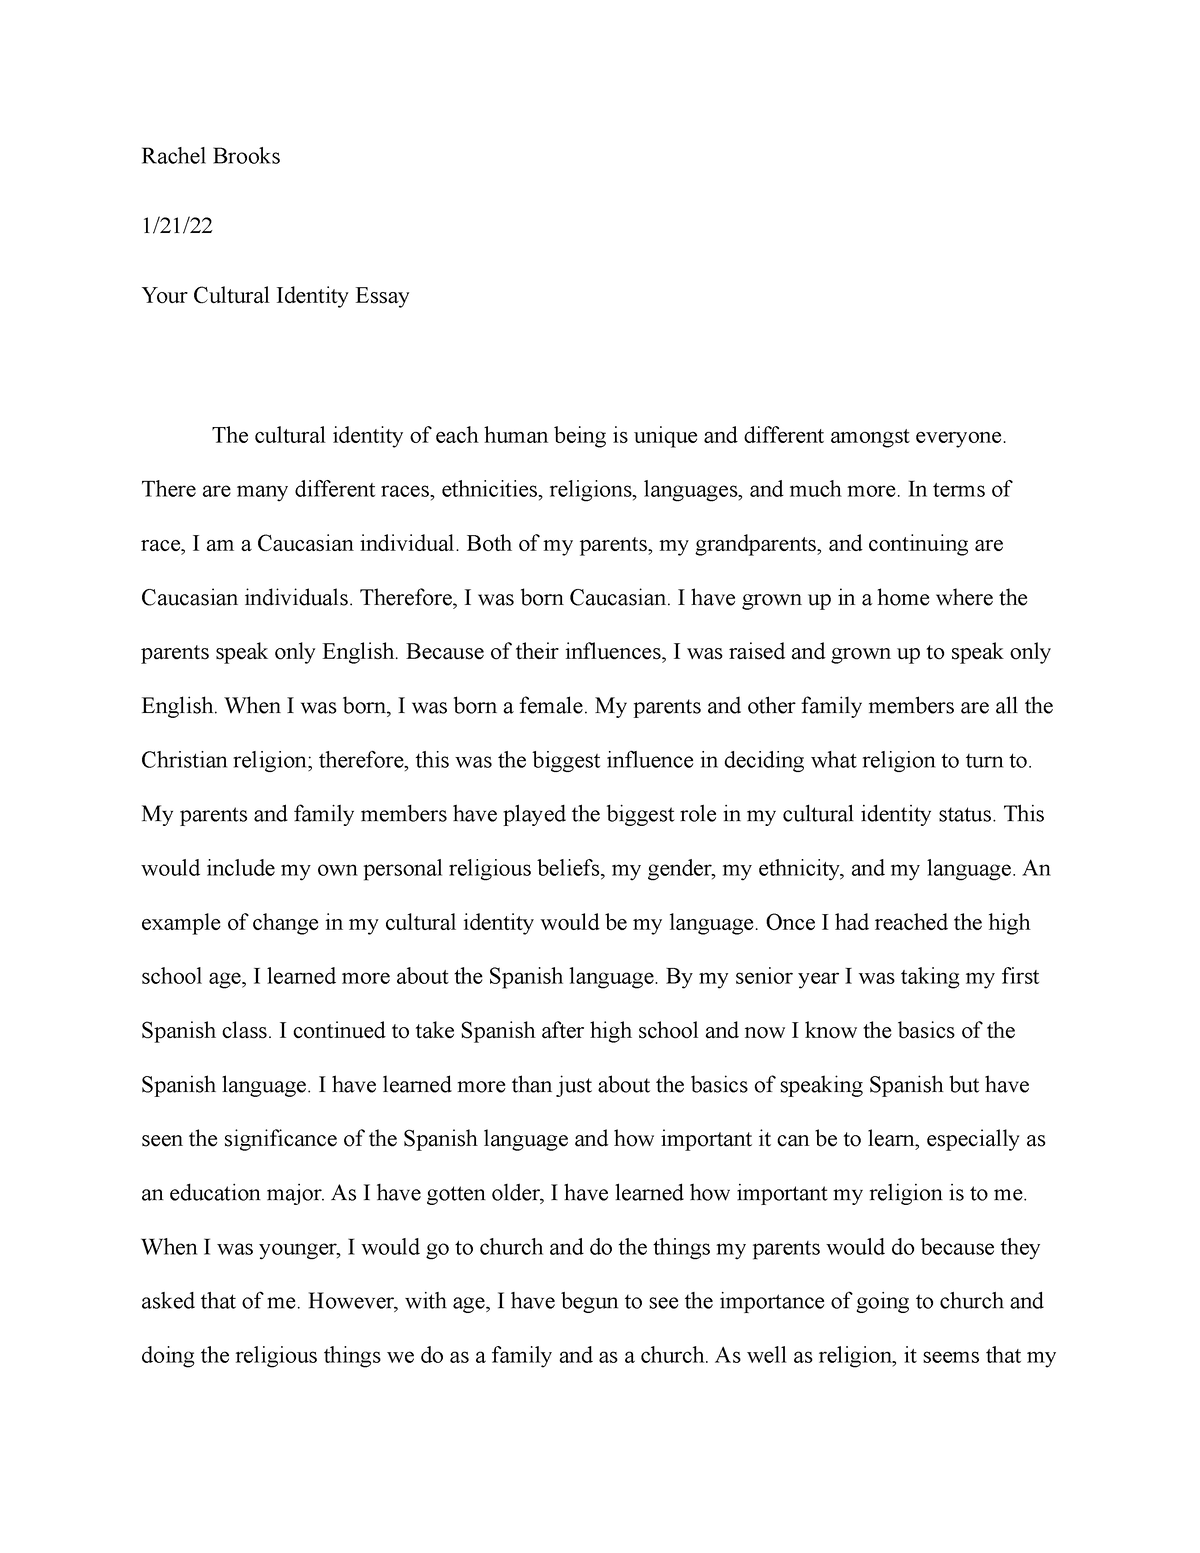 cultural identity meaning essay